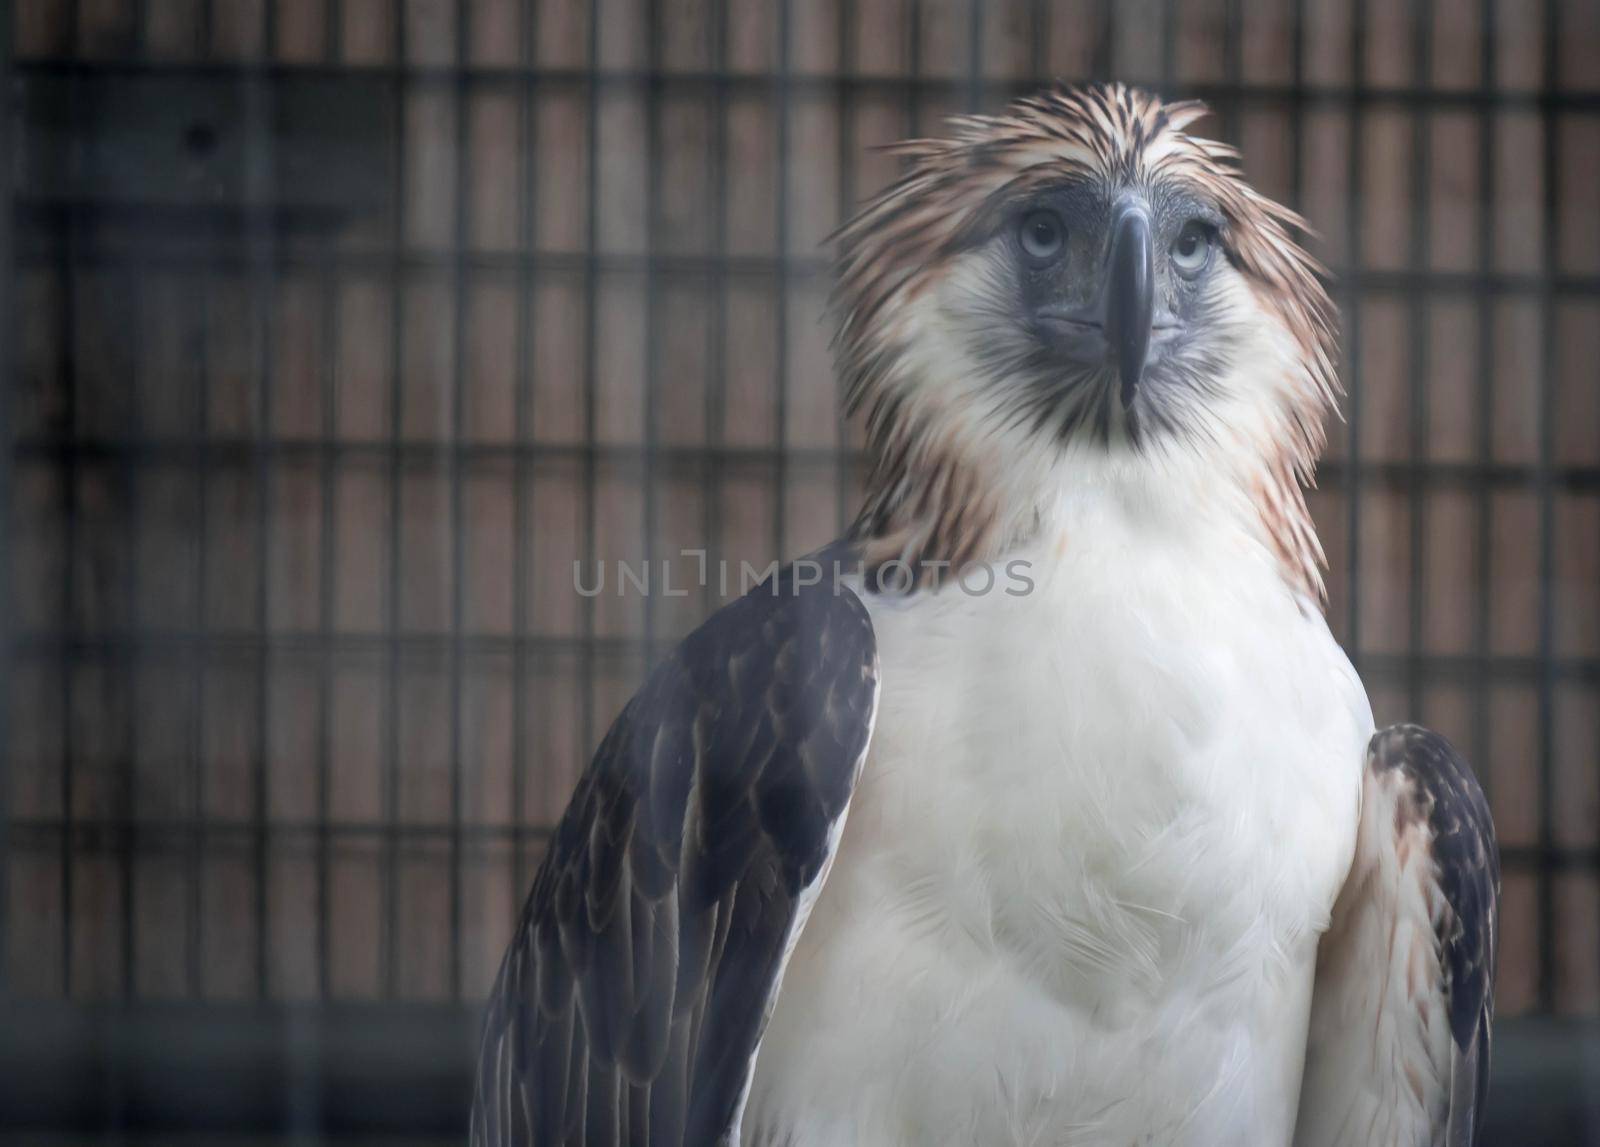 The Philippine eagle (Pithecophaga jefferyi) is one of the most endangered bird species in the world. It is believed that less than 500 pairs survive in the wild. by billroque